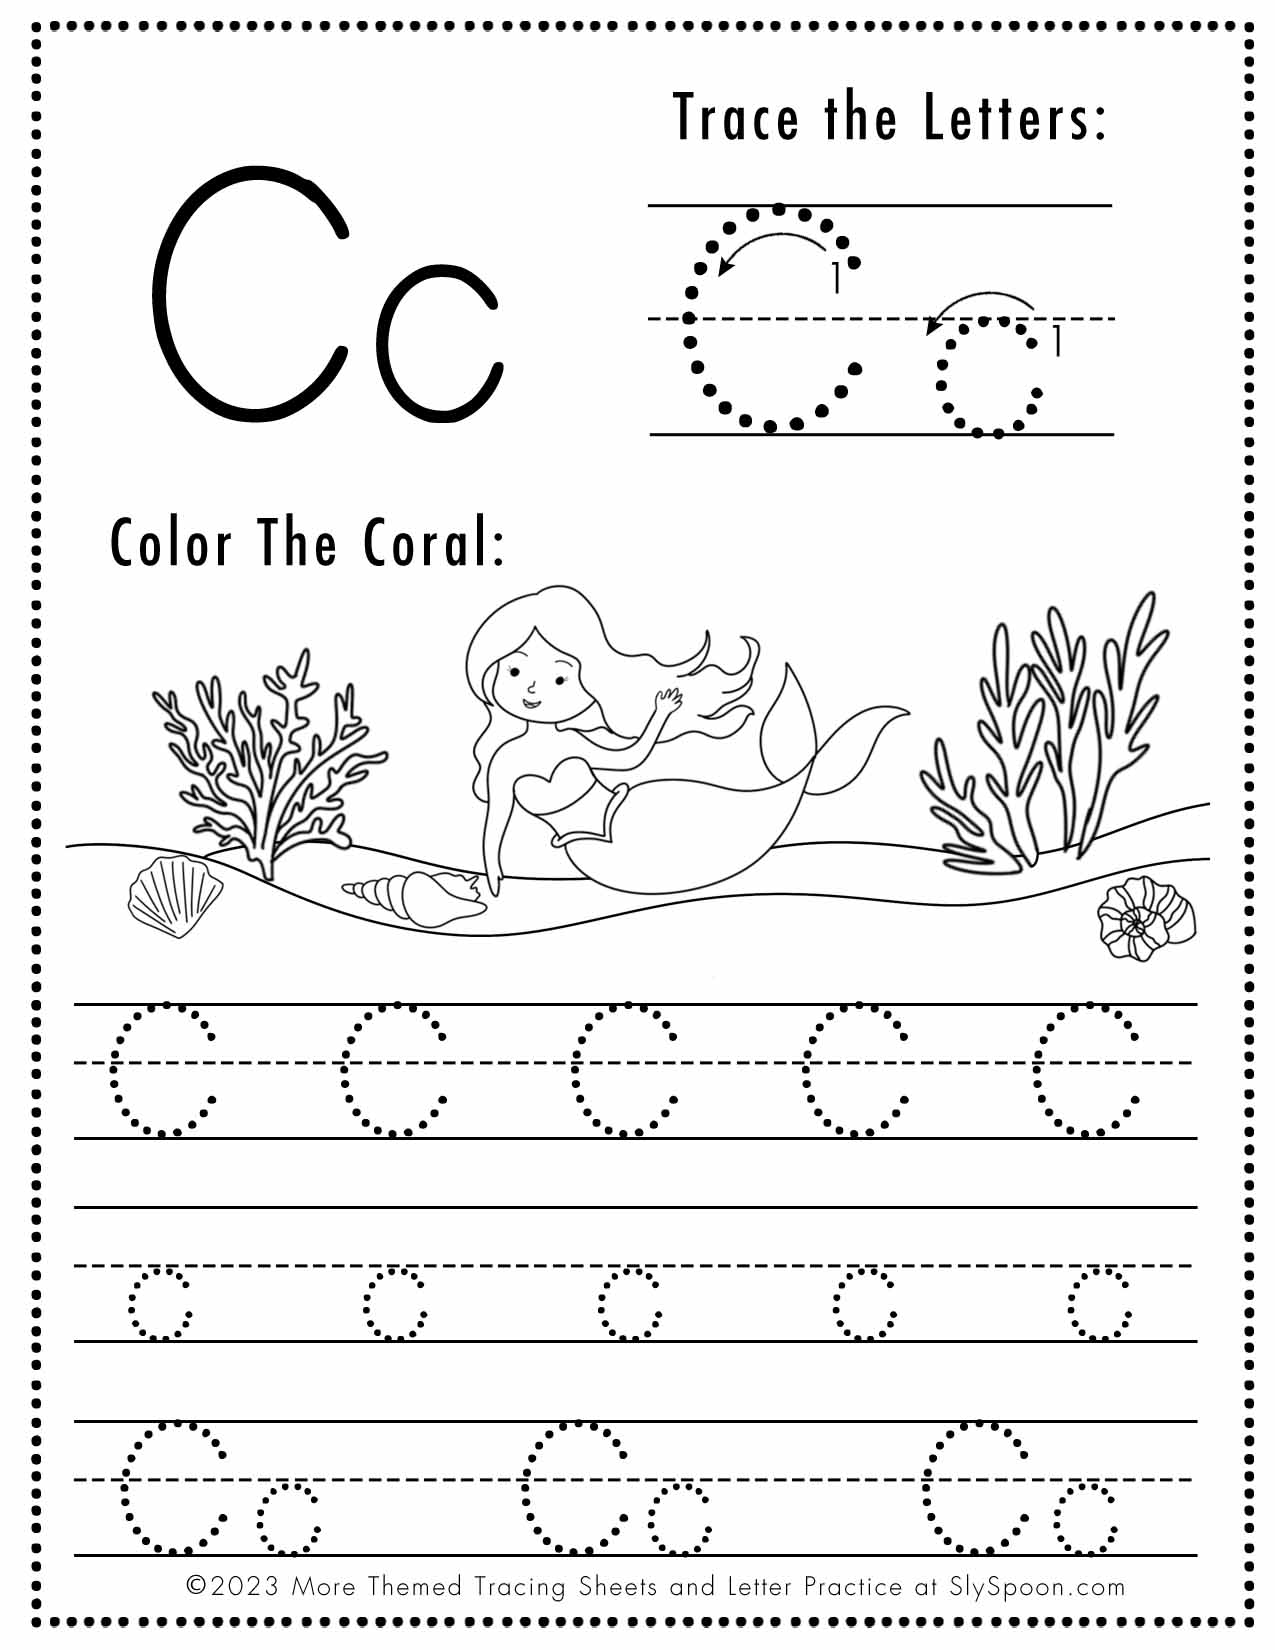 free-letter-c-tracing-worksheets-printable-mermaid-themed-sly-spoon